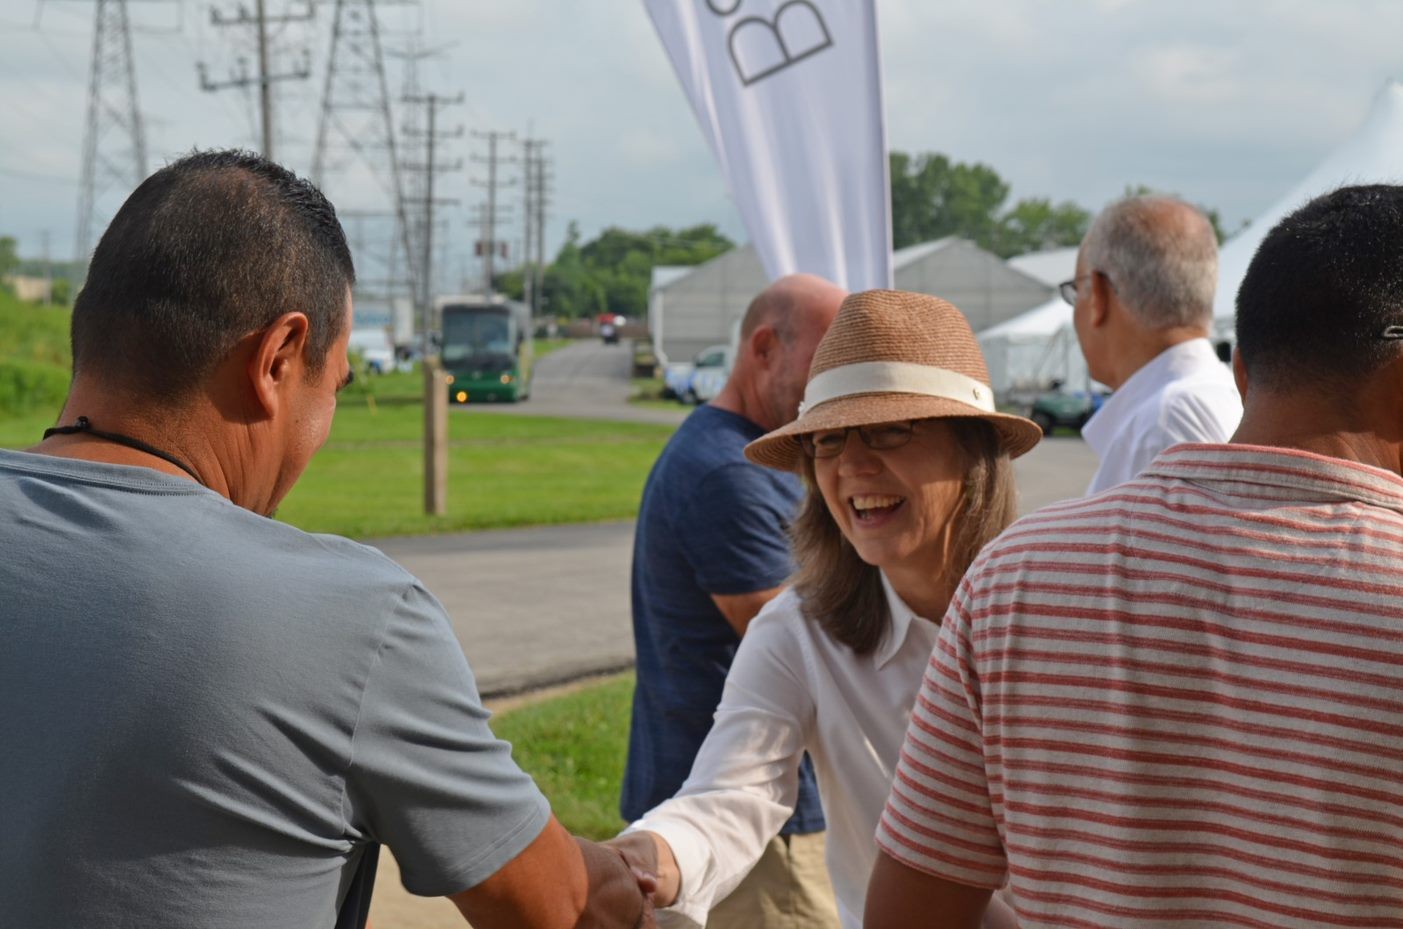 Company owner, Anna Ball, shakes and greets every customer visiting our campus for our exciting annual Customer Day!